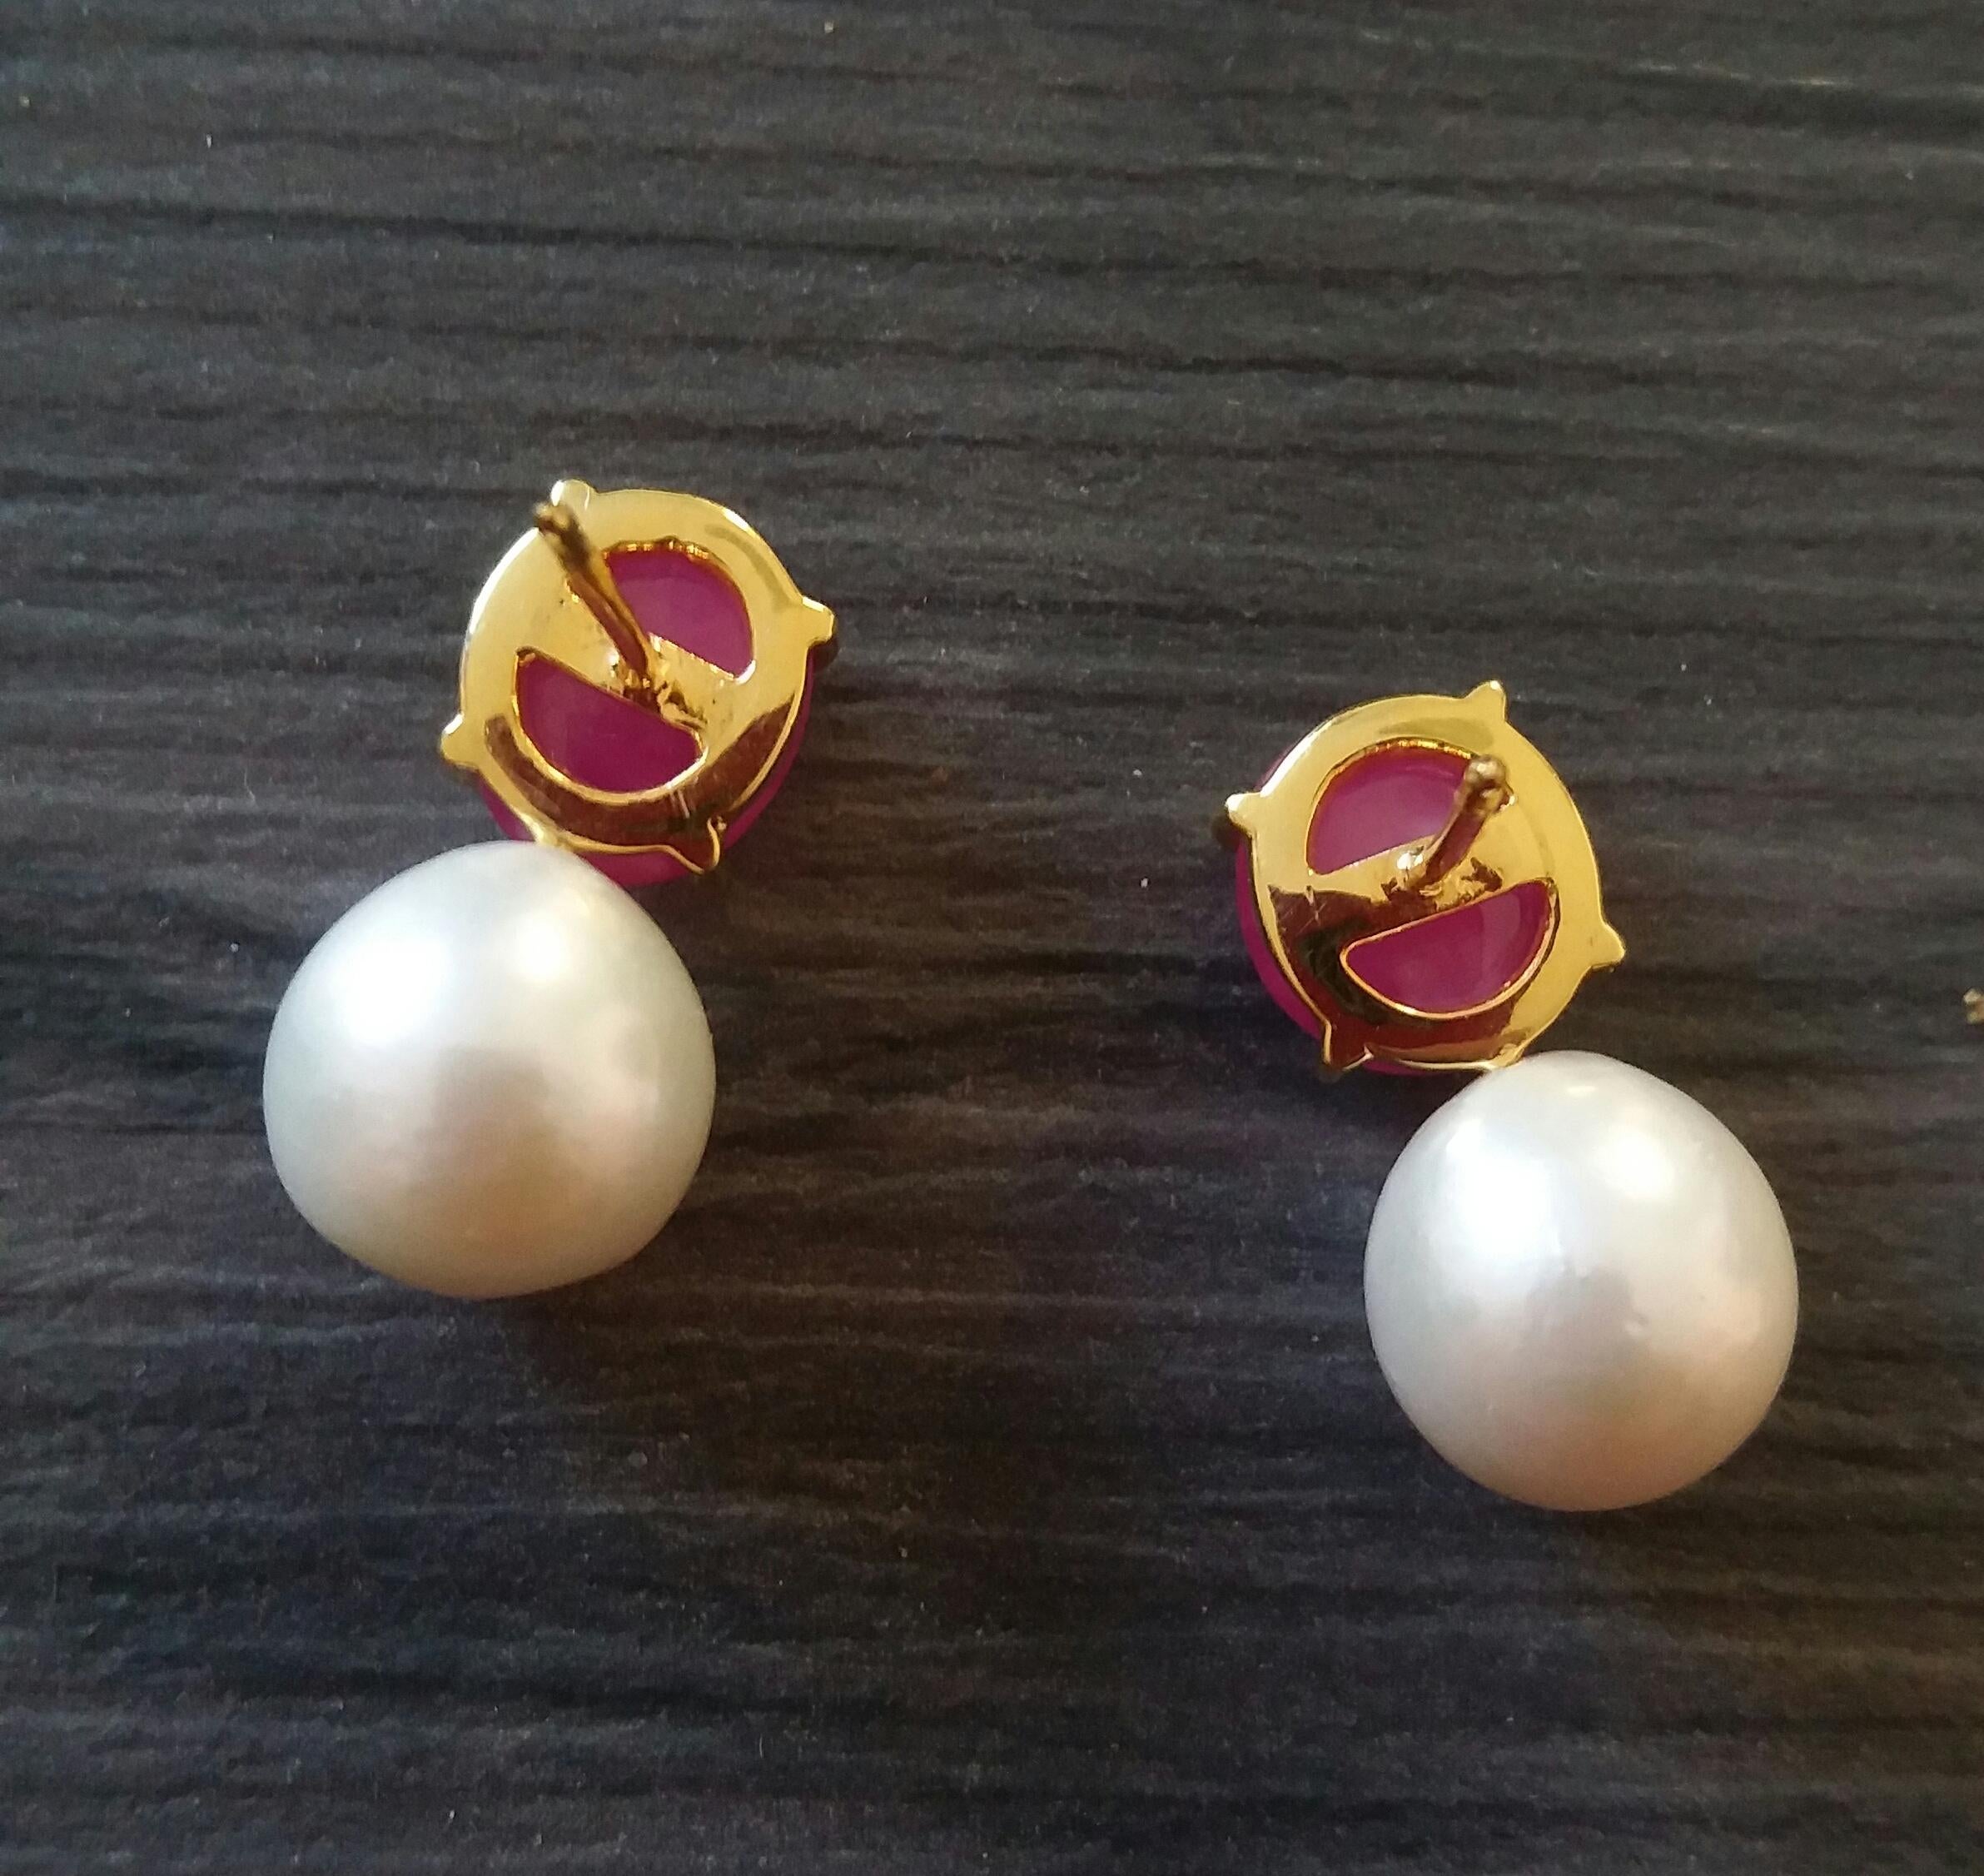 Simple Chic Earrings with top part made of 2 Natural Ruby Oval Cabochons (11 x 10 mm ) set in 14 Kt yellow from which are attached 2 White Baroque Pearls of 12 mm in diameter

In 1978 our workshop started in Italy to make simple-chic Art Deco style